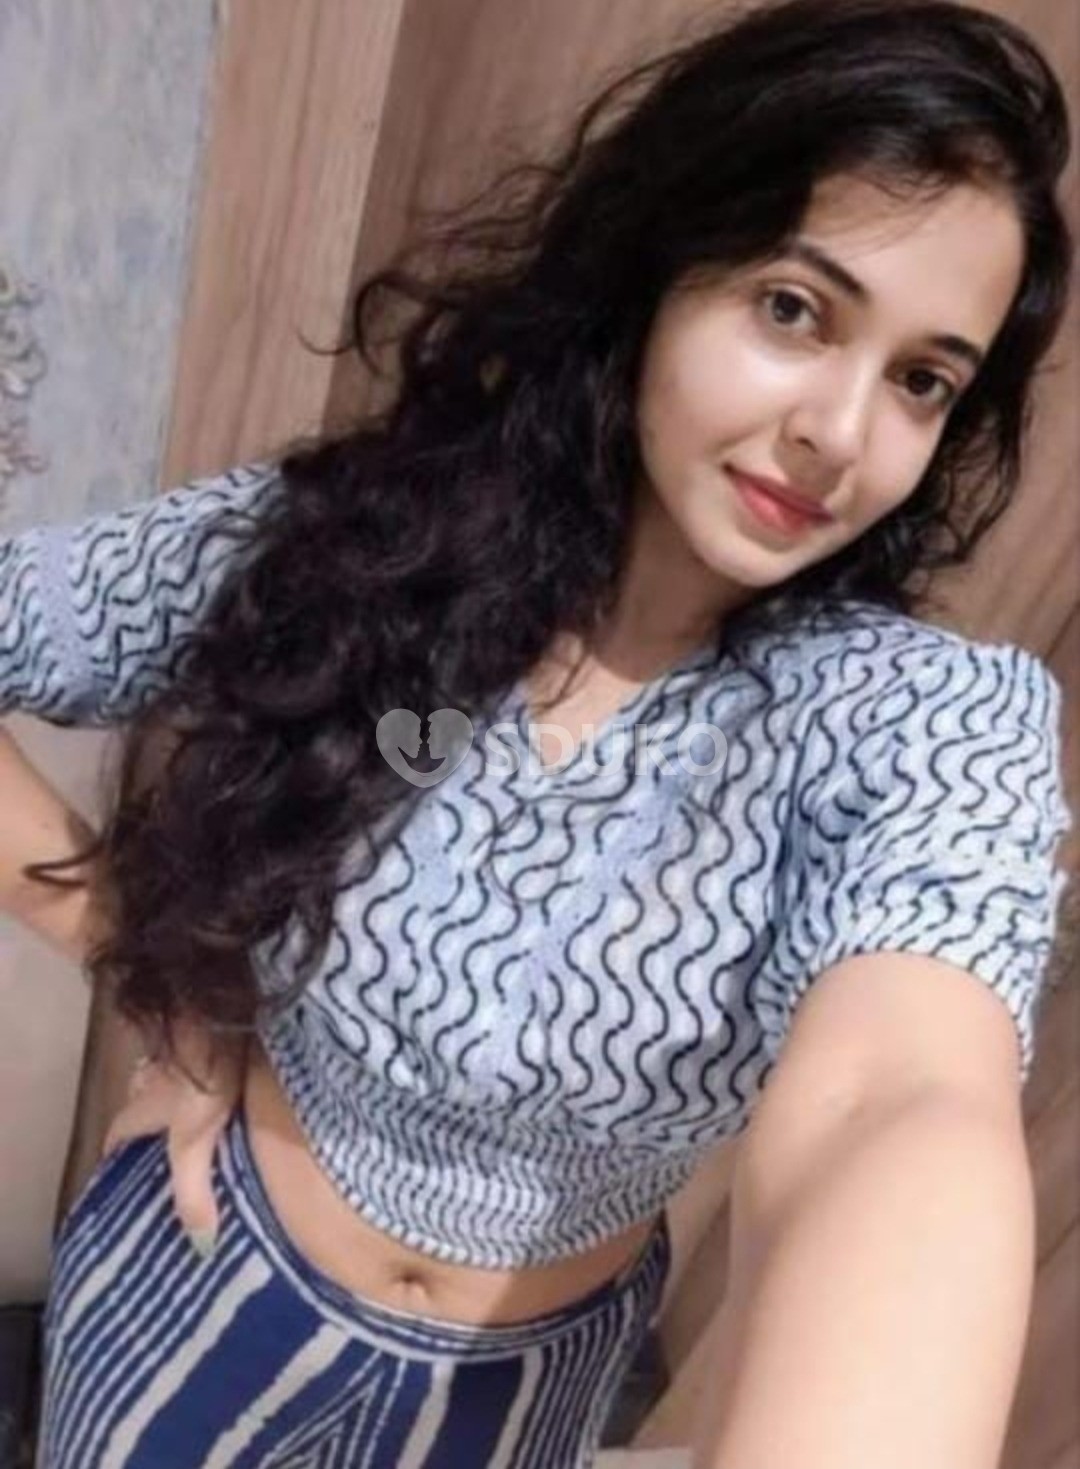 Hyderaguda LOW PRICE🔸m✅( 24×7 ) SERVICE A AVAILABLE 100% SAFE AND S SECURE UNLIMITED ENJOY HOT COLLEGE GIRL HOUSEW